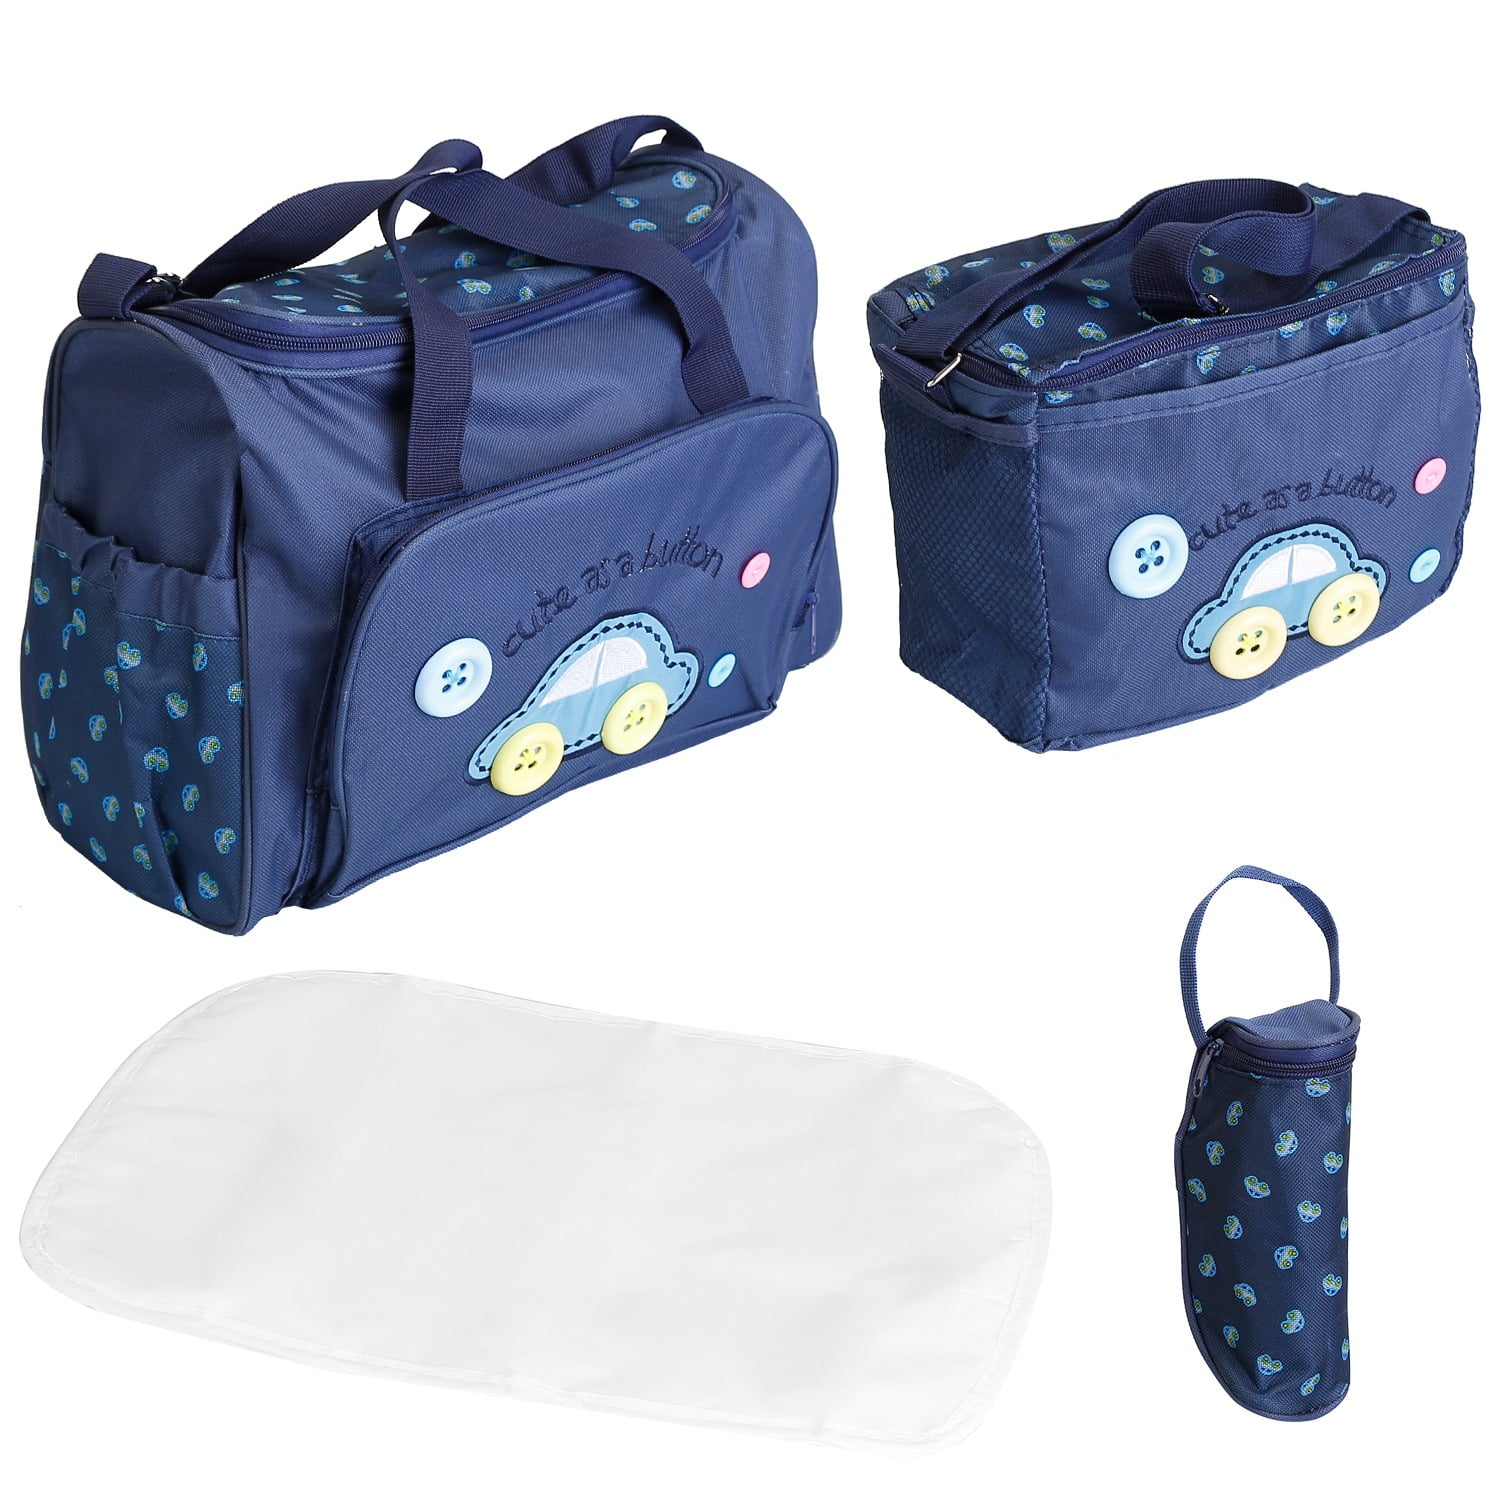 Baby Nappy Diaper Bags Set, iMounTEK Mummy Diaper Shoulder Bags with Nappy Changing Pad Insulated Pockets Travel Tote Bags for Mom Dad Blue-Set of 5